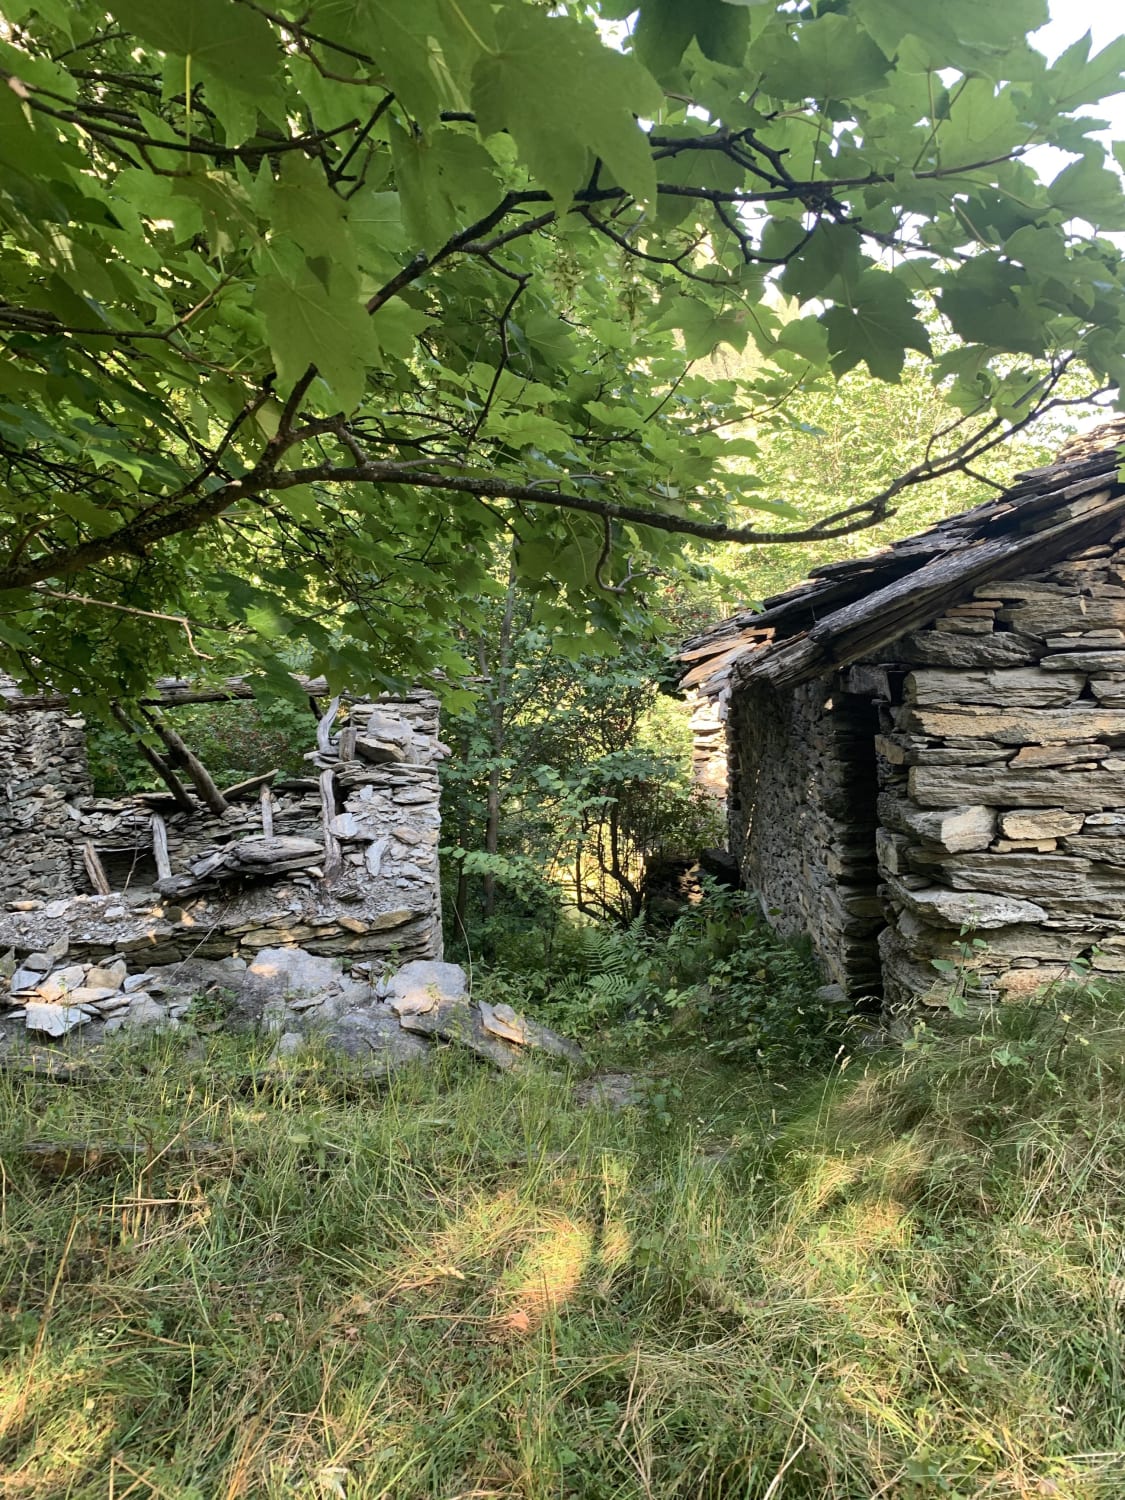 Abandoned town I found in the Italian alps